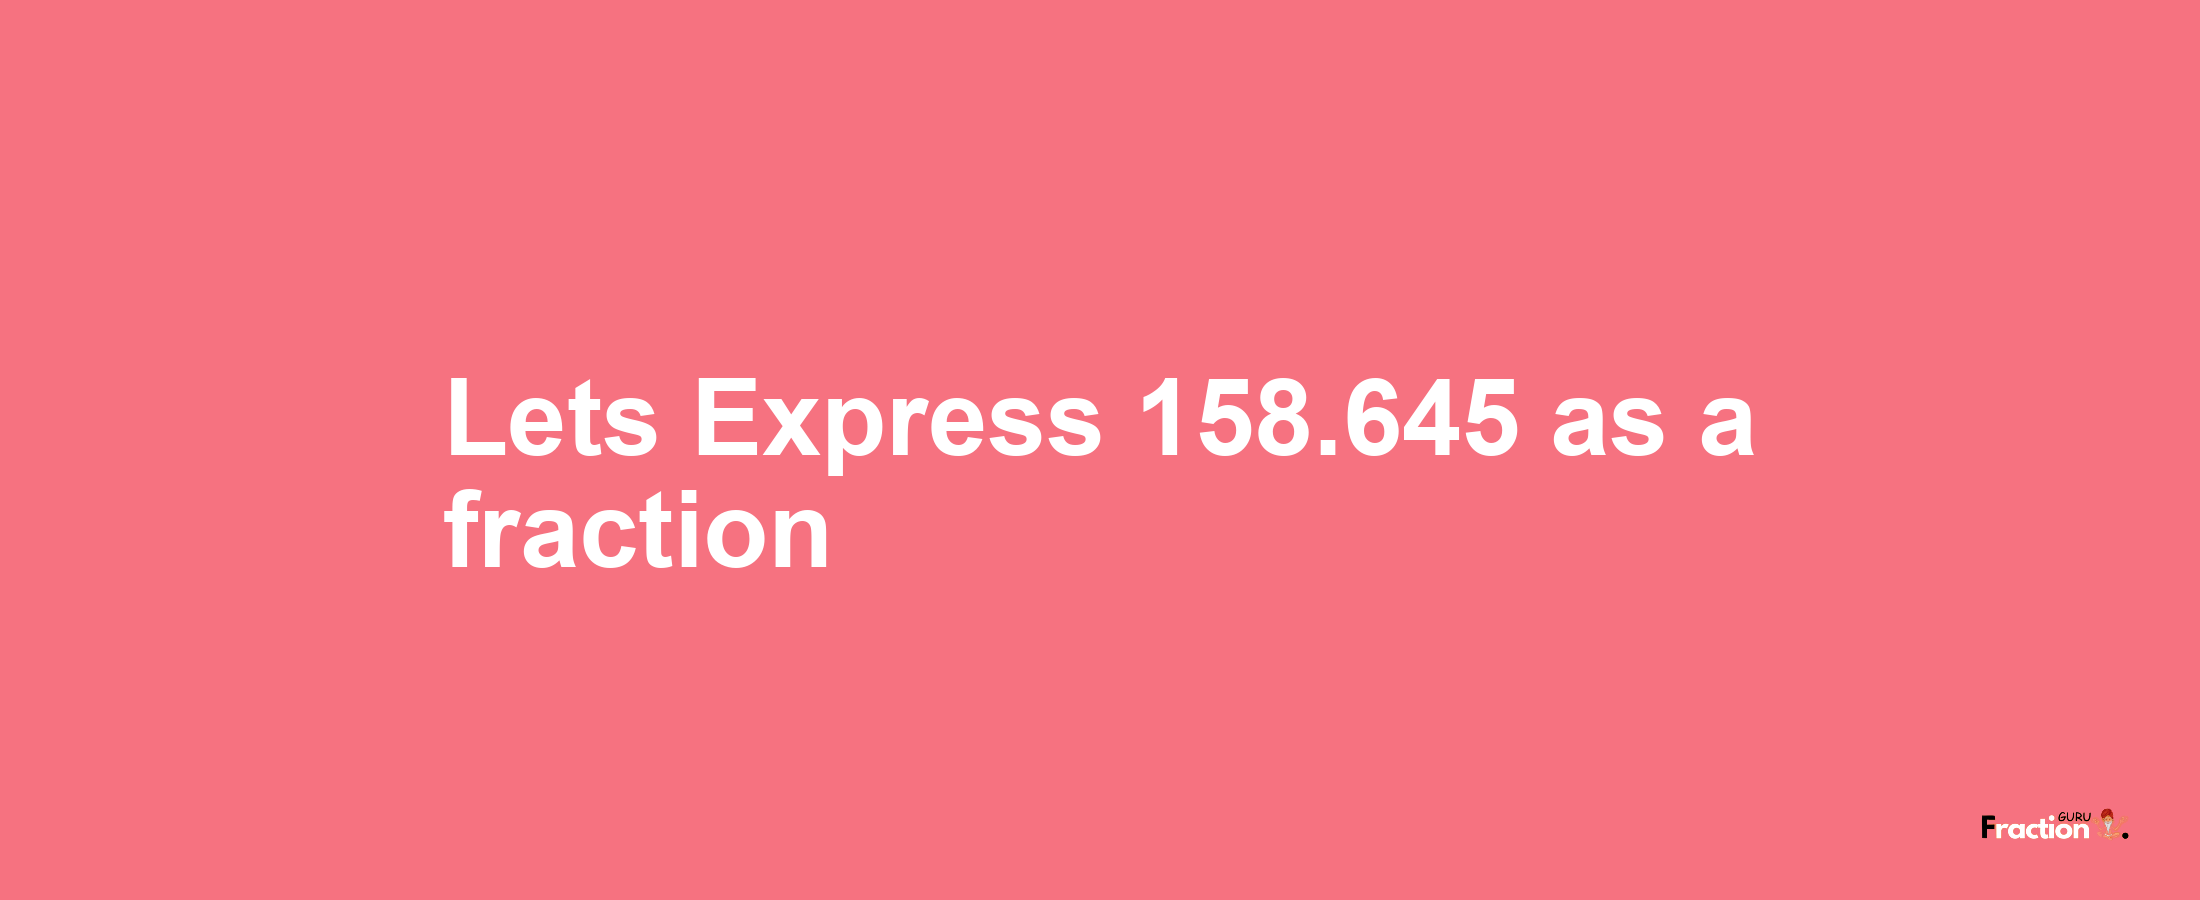 Lets Express 158.645 as afraction